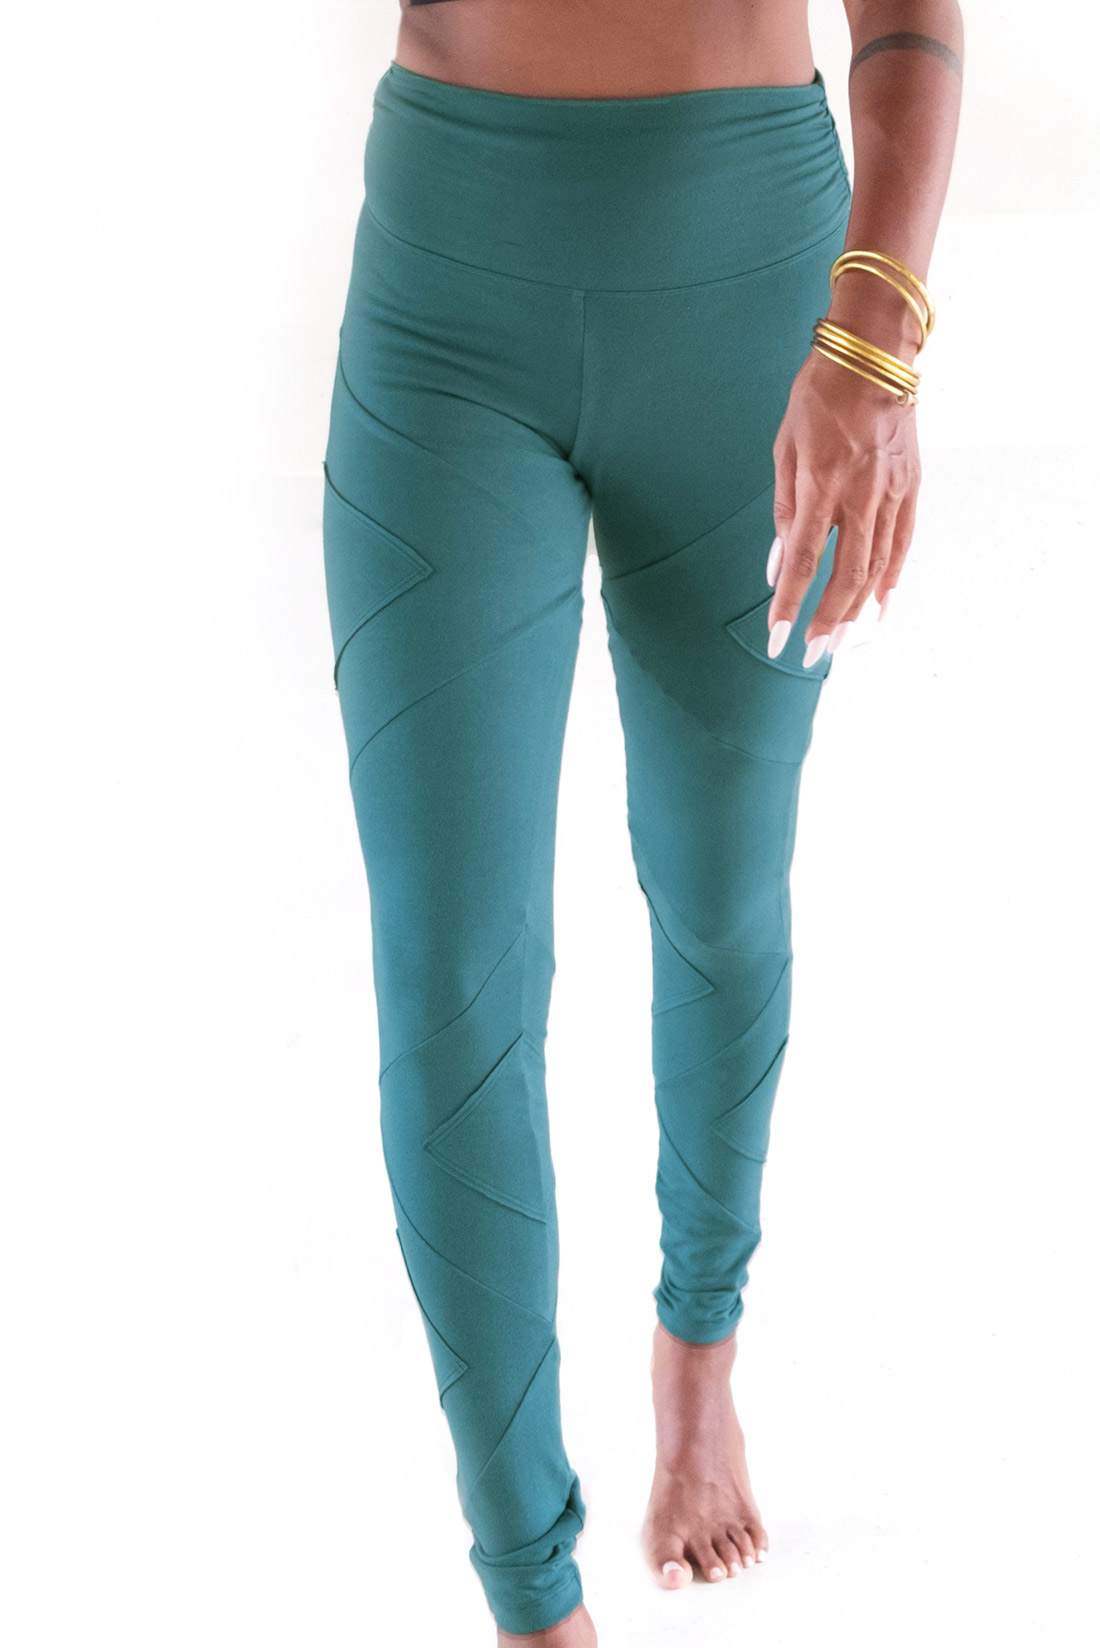 GREEN Leggings Yoga Organic Cotton Pants Thick & Stretchy Comfortable  Casual Wear Best Legging OFFRANDES 